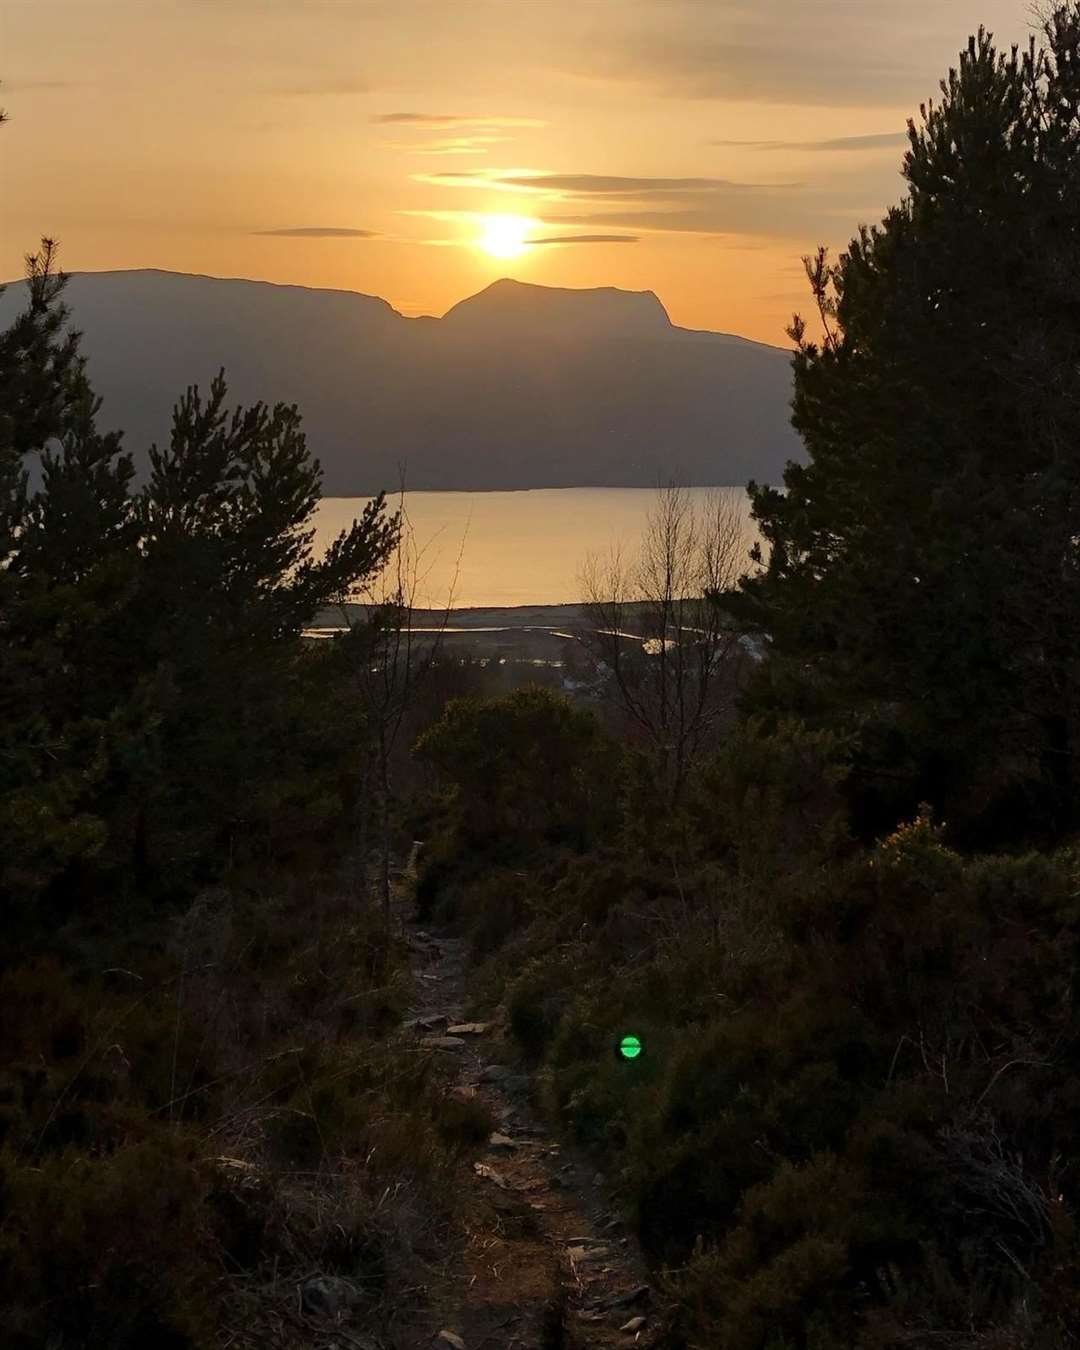 Sunset on Ullapool Hill. Picture by: Shaun Salmon.